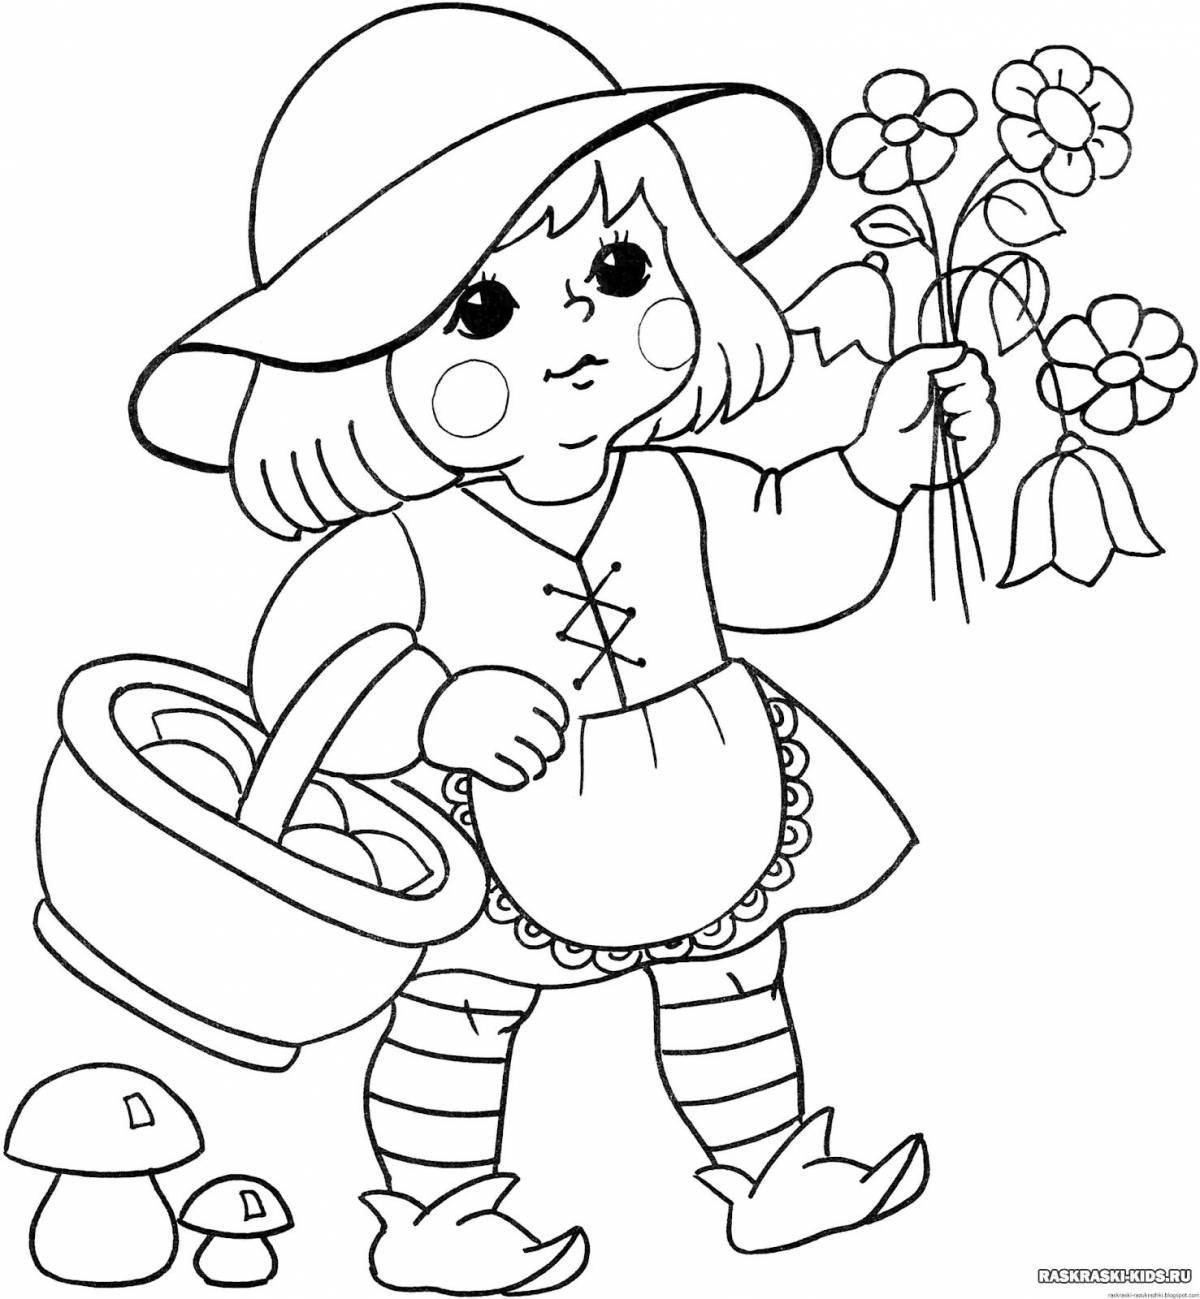 Adorable coloring book for children 3-6 years old